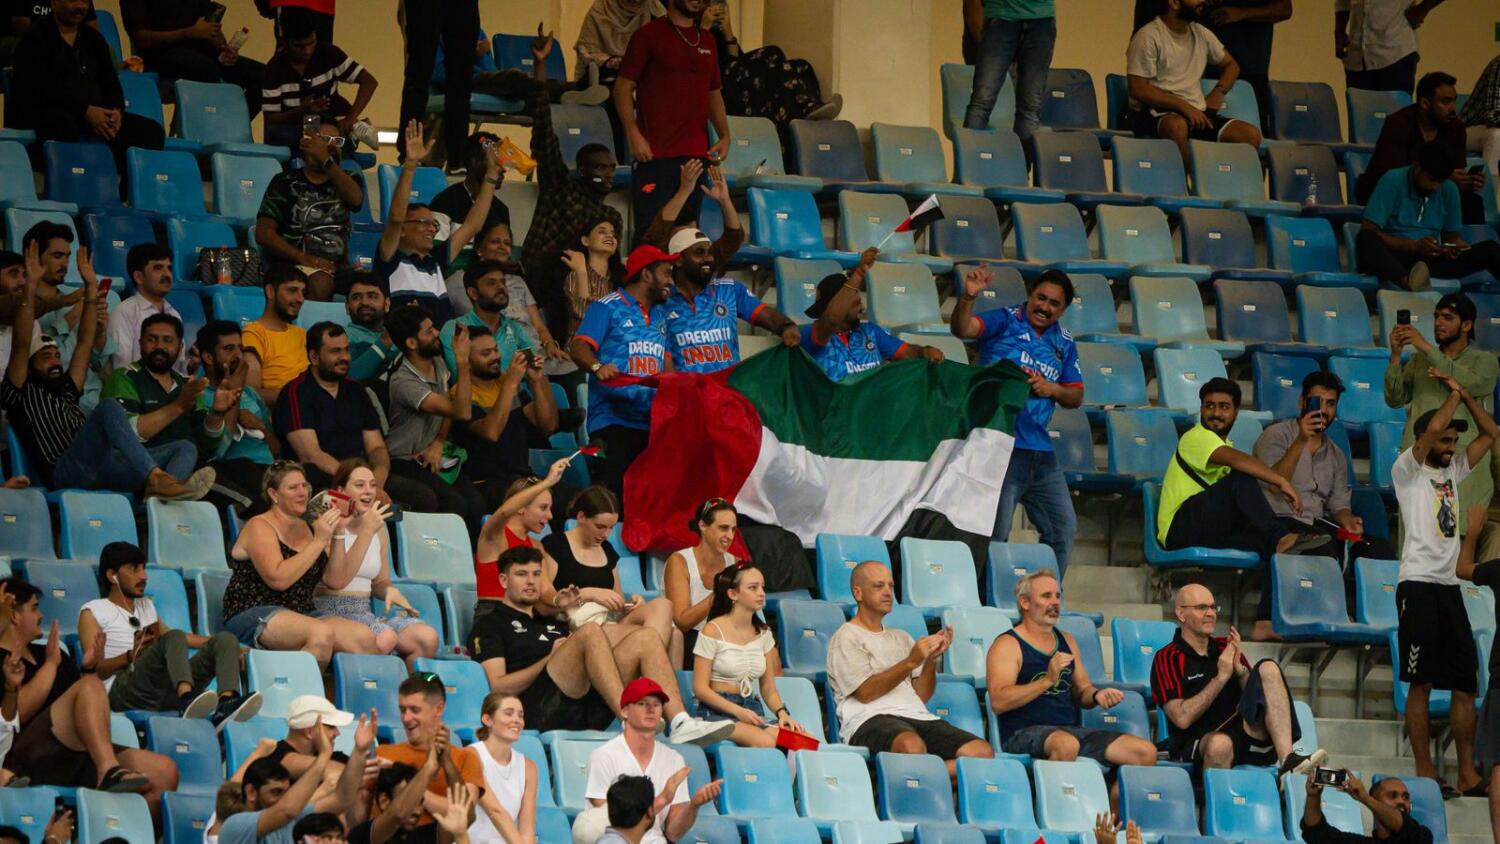 UAE fans erupt in joy after it beat New Zealand during the second T20I match at Dubai International Stadium on Saturday